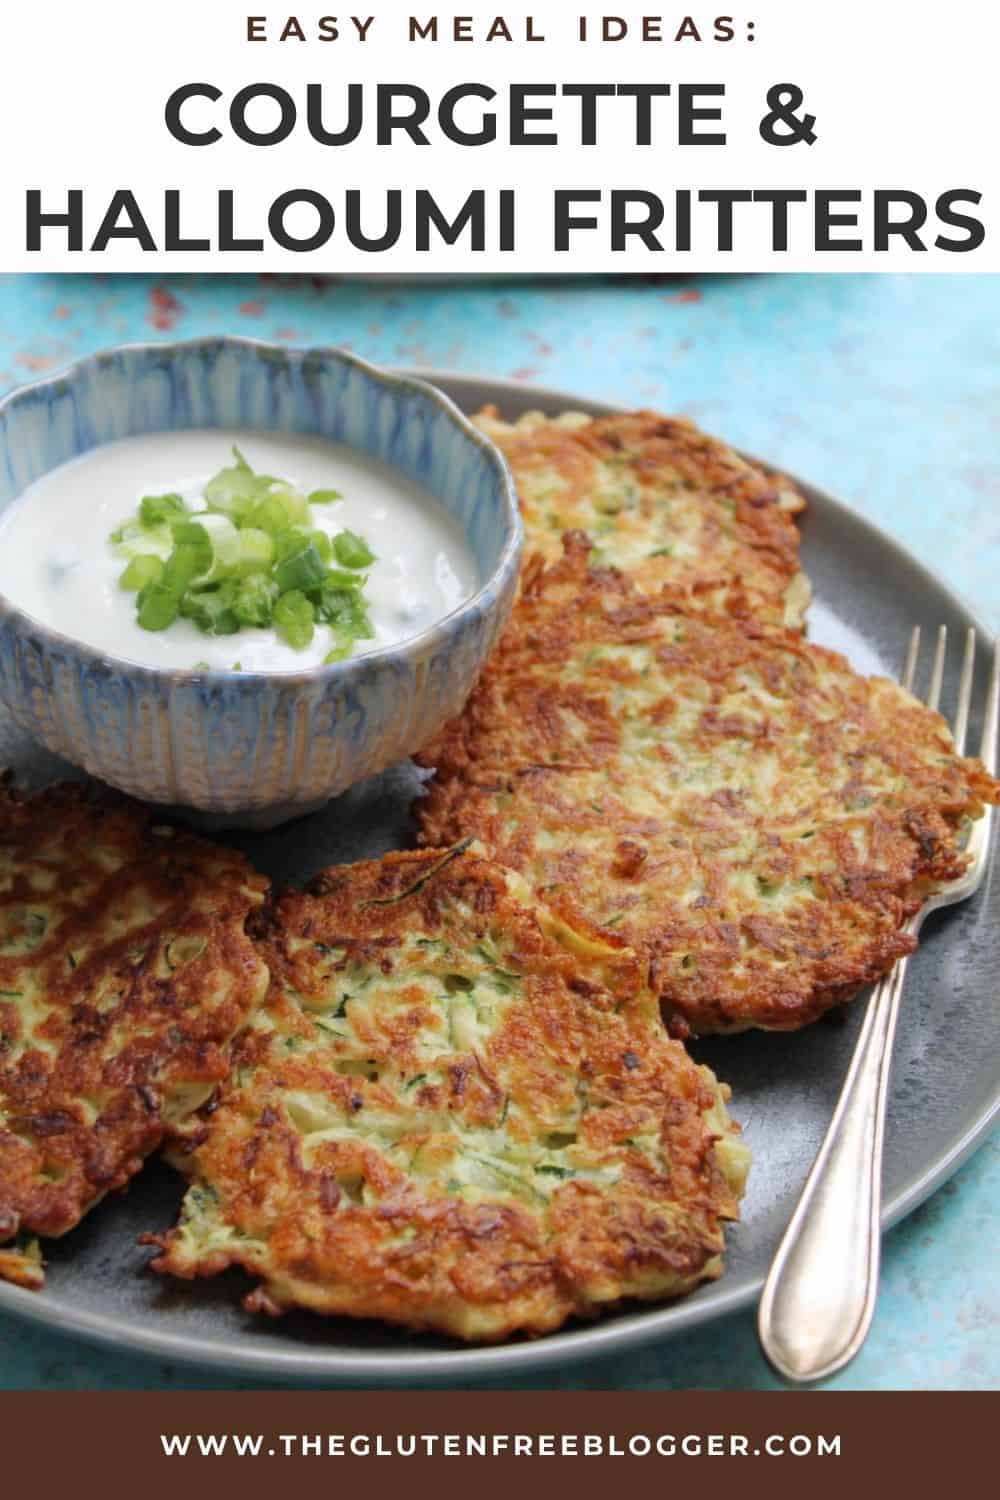 Courgette and Halloumi Fritters (Gluten Free)